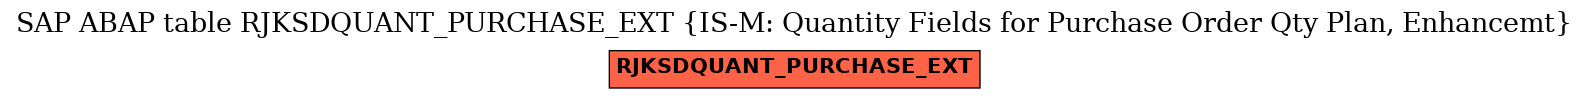 E-R Diagram for table RJKSDQUANT_PURCHASE_EXT (IS-M: Quantity Fields for Purchase Order Qty Plan, Enhancemt)